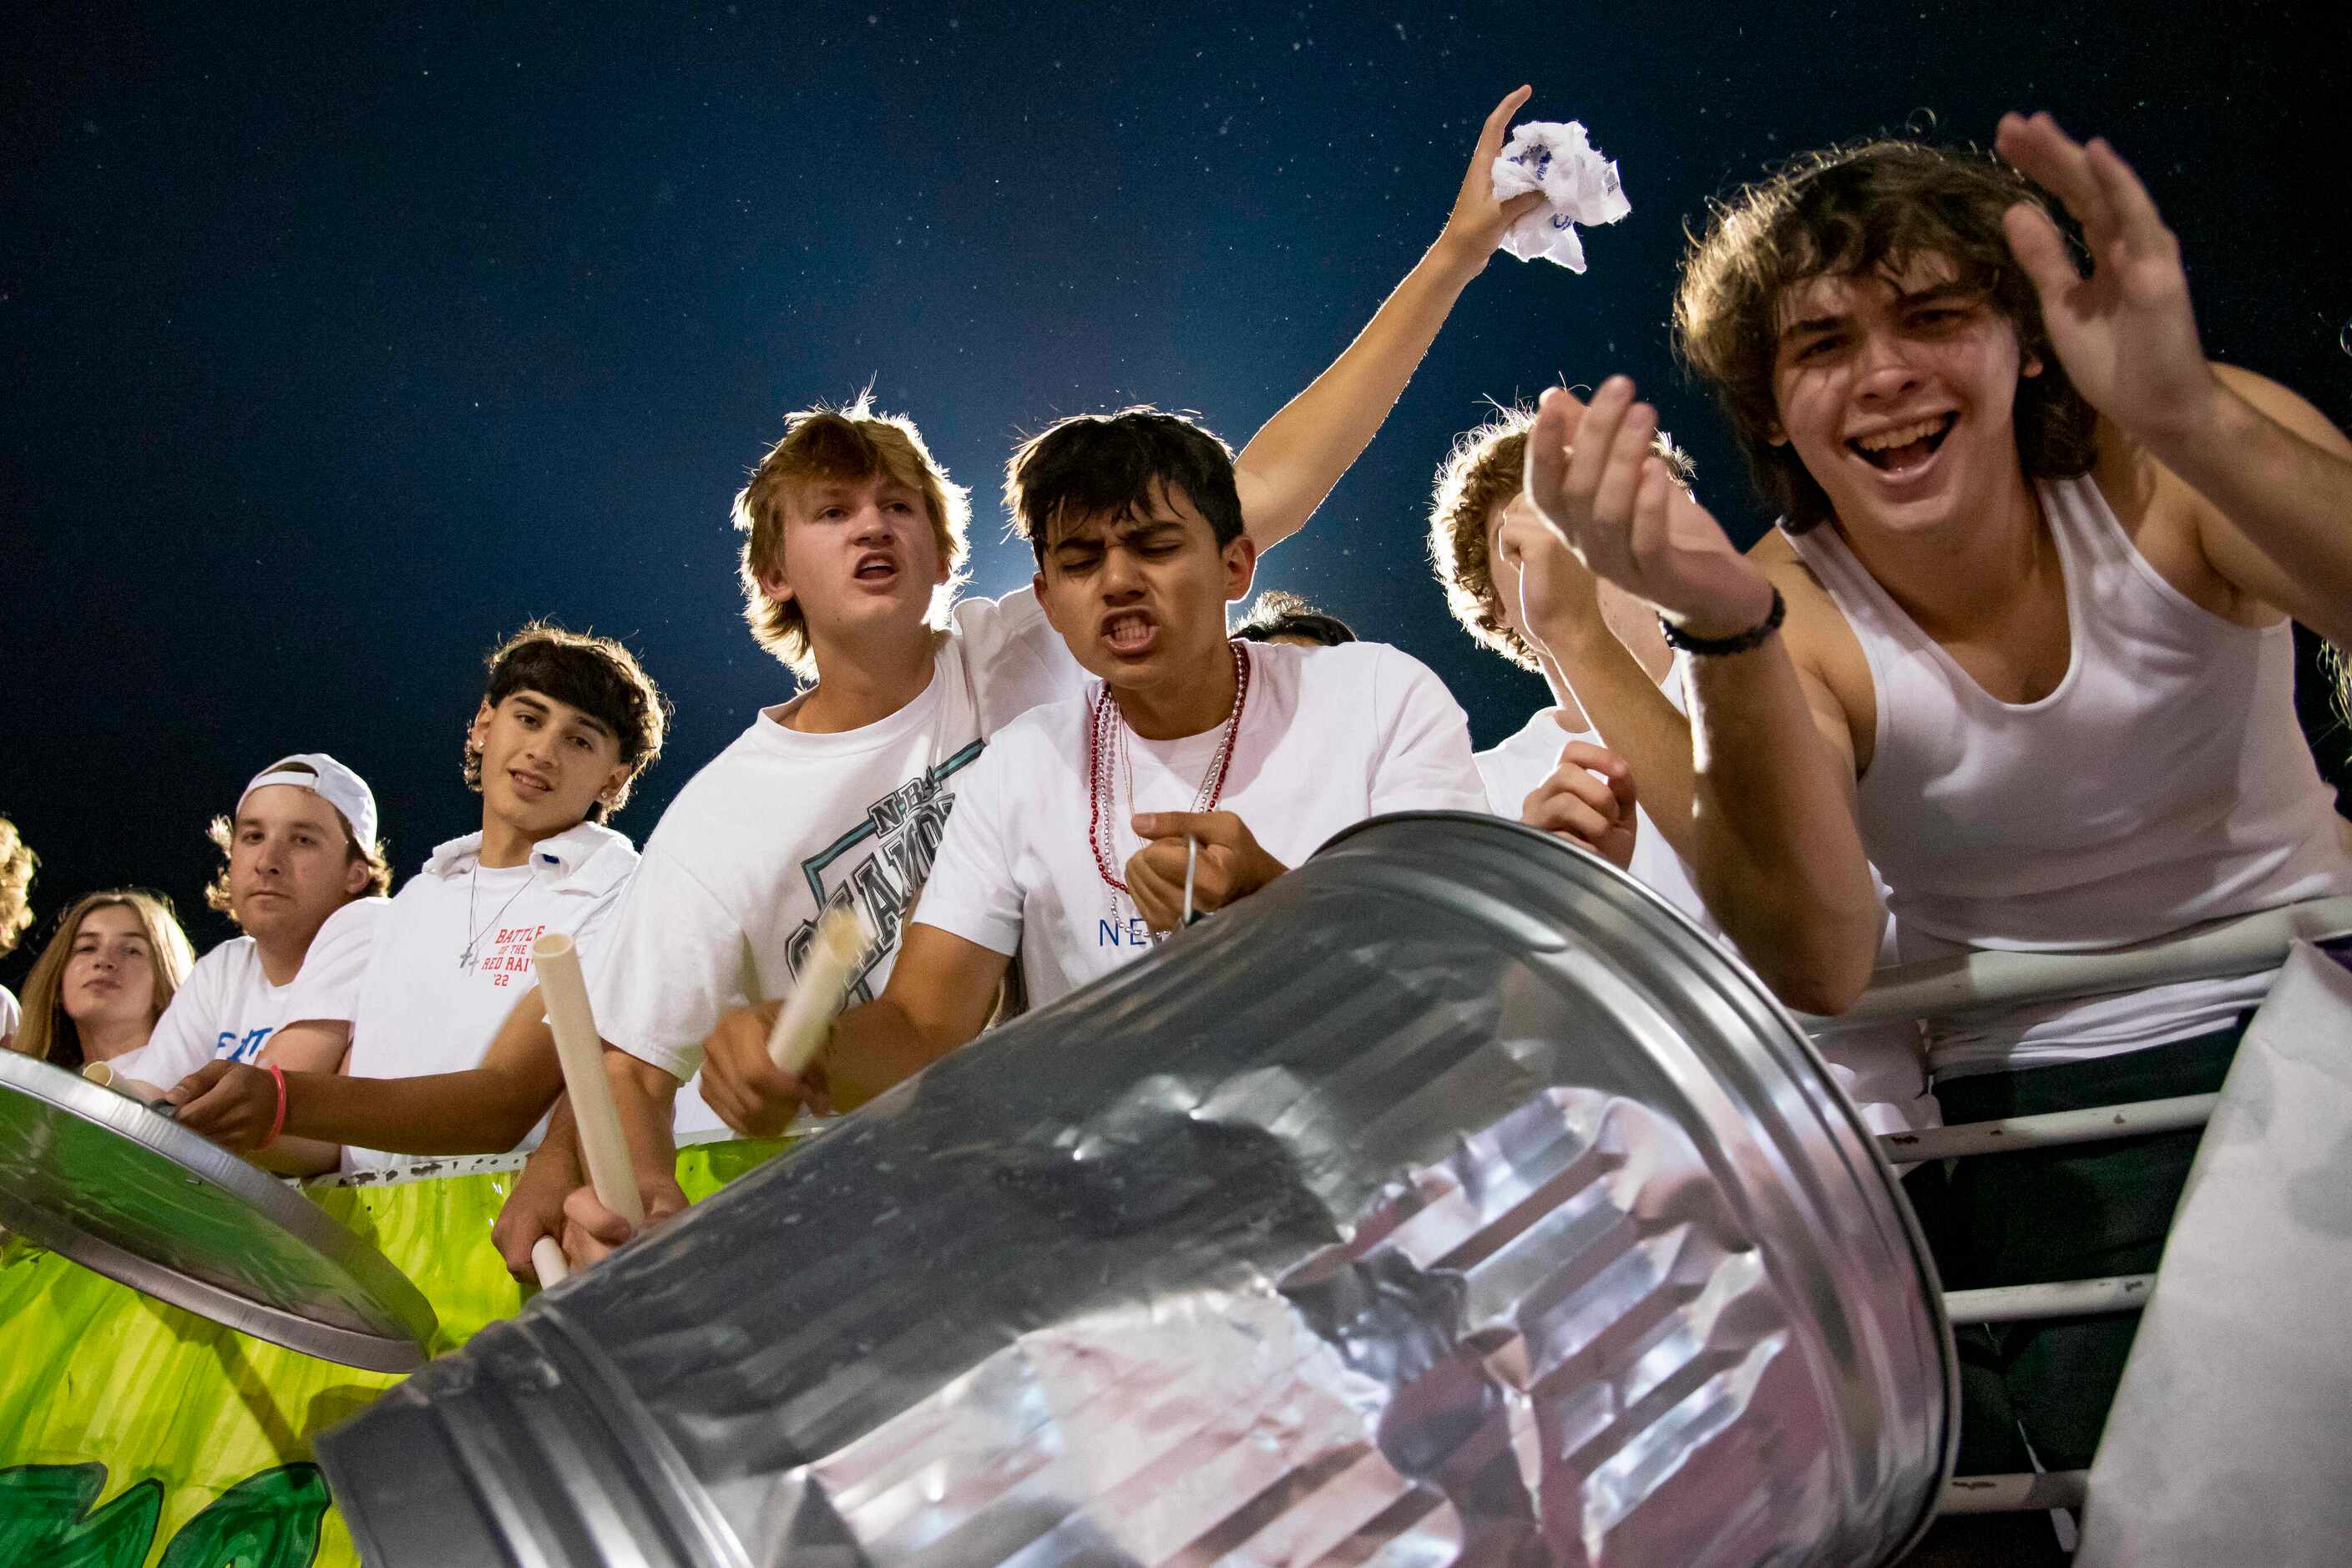 Members of the Grapevine student section bash a trash can after the Mustangs convert on a...